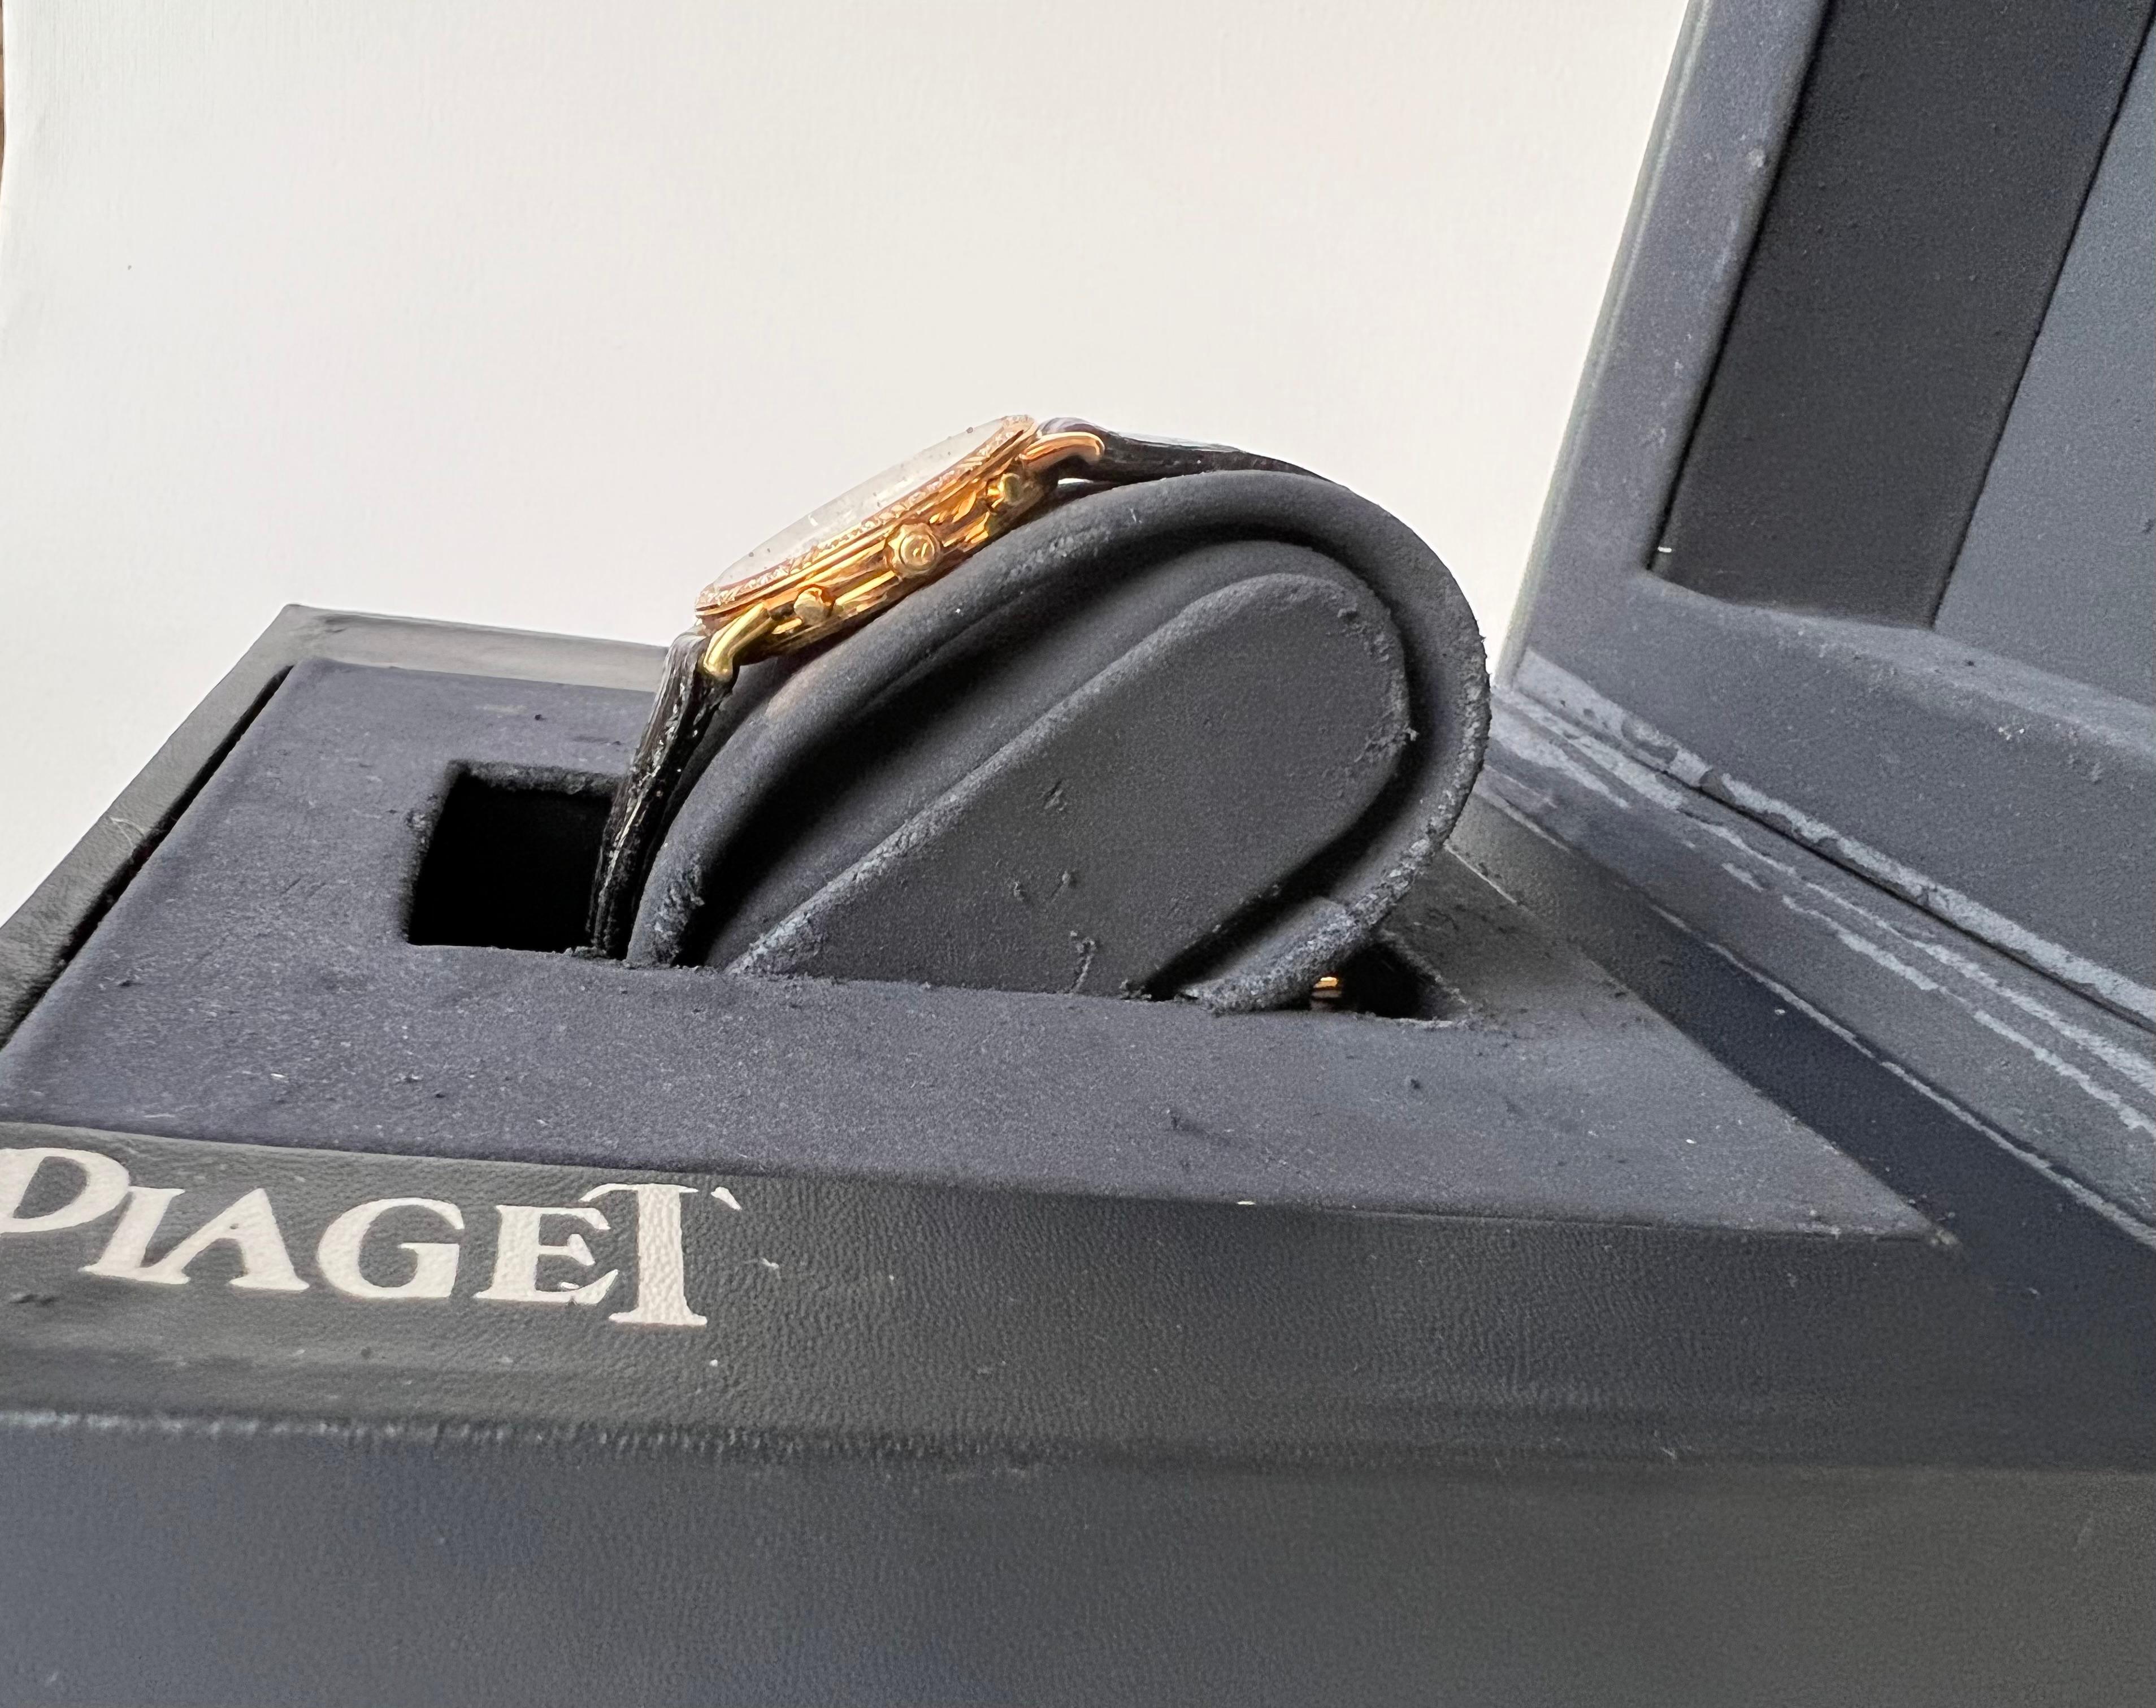 piaget serial number check